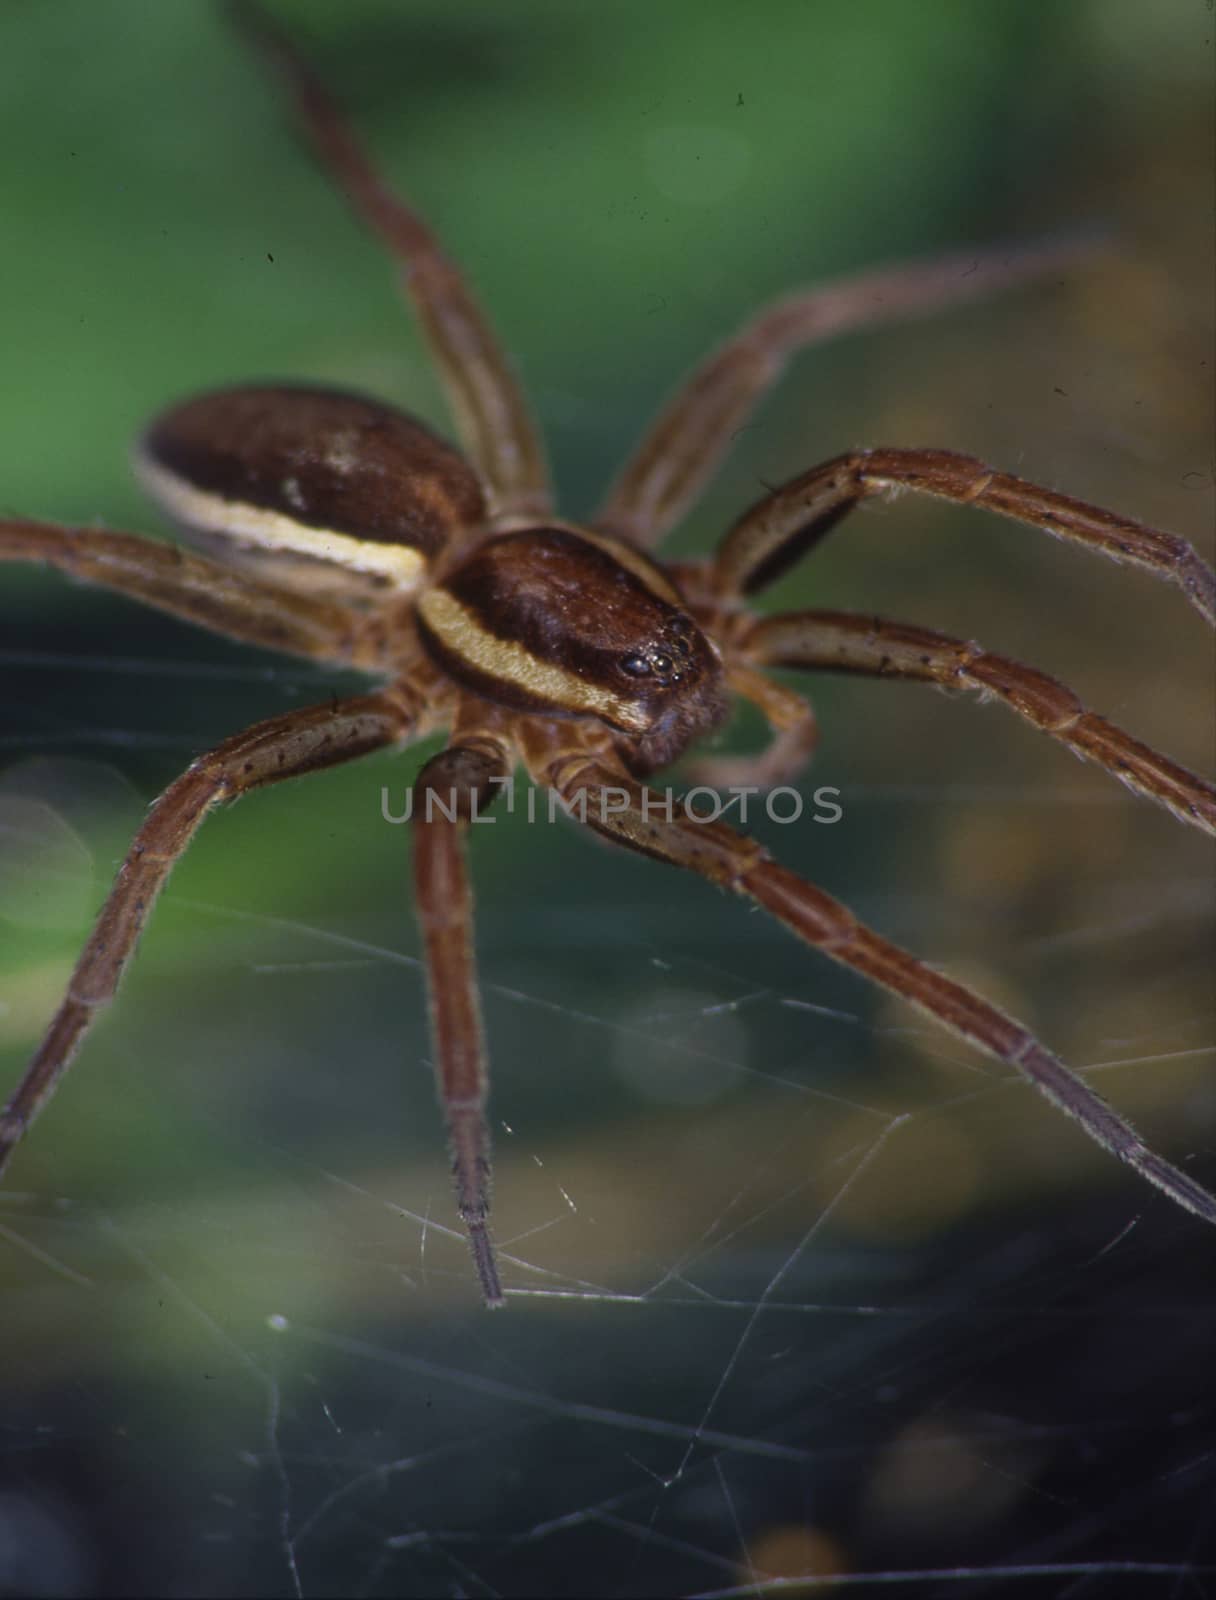 edged hunting spider in wait position by Dr-Lange